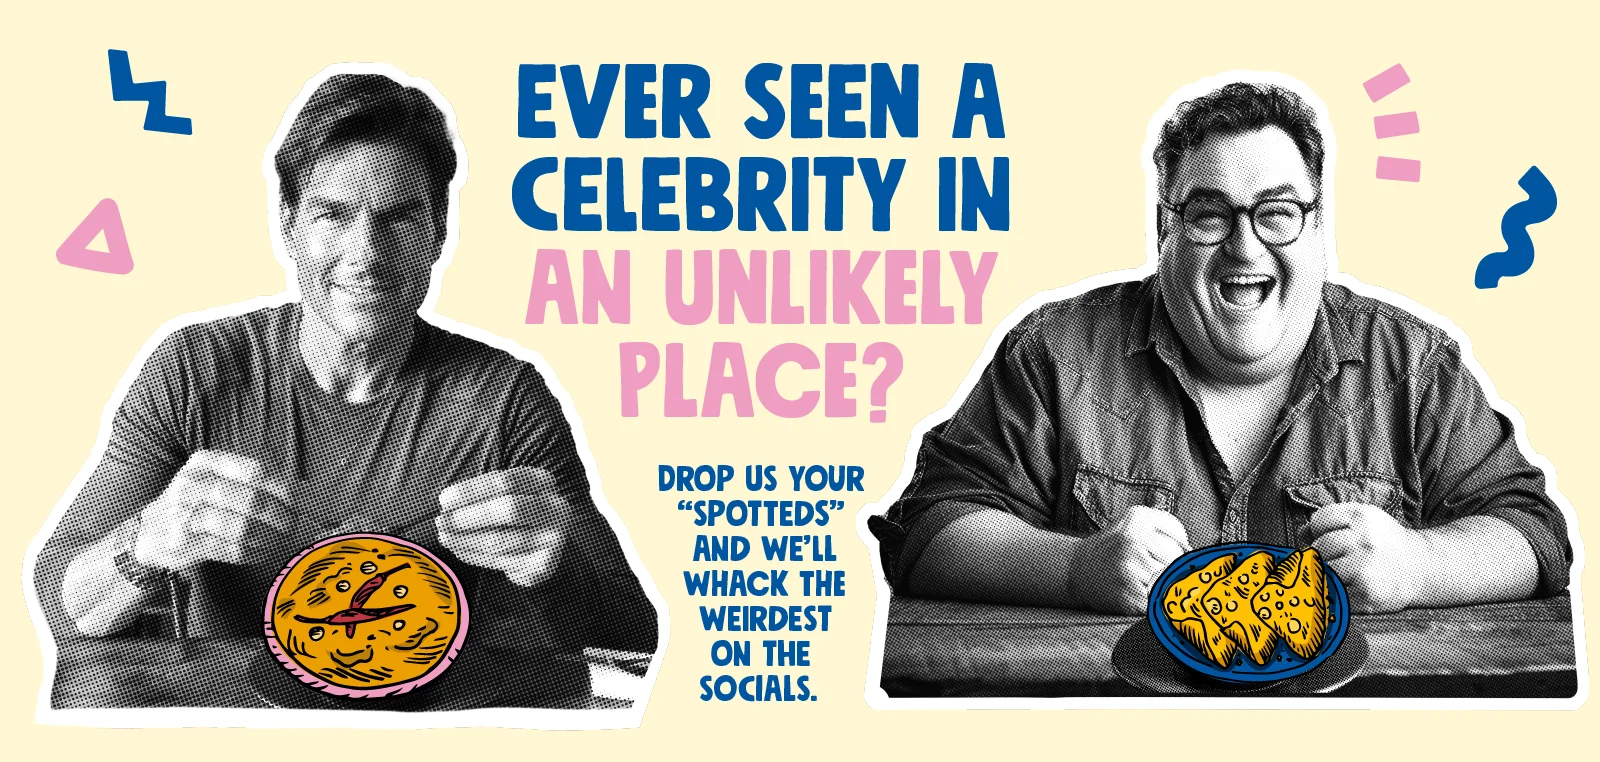 Ever seen a celebrity in an unlikely place? Drop us your "Spotteds" and we'll whack the weirdest on the socials.